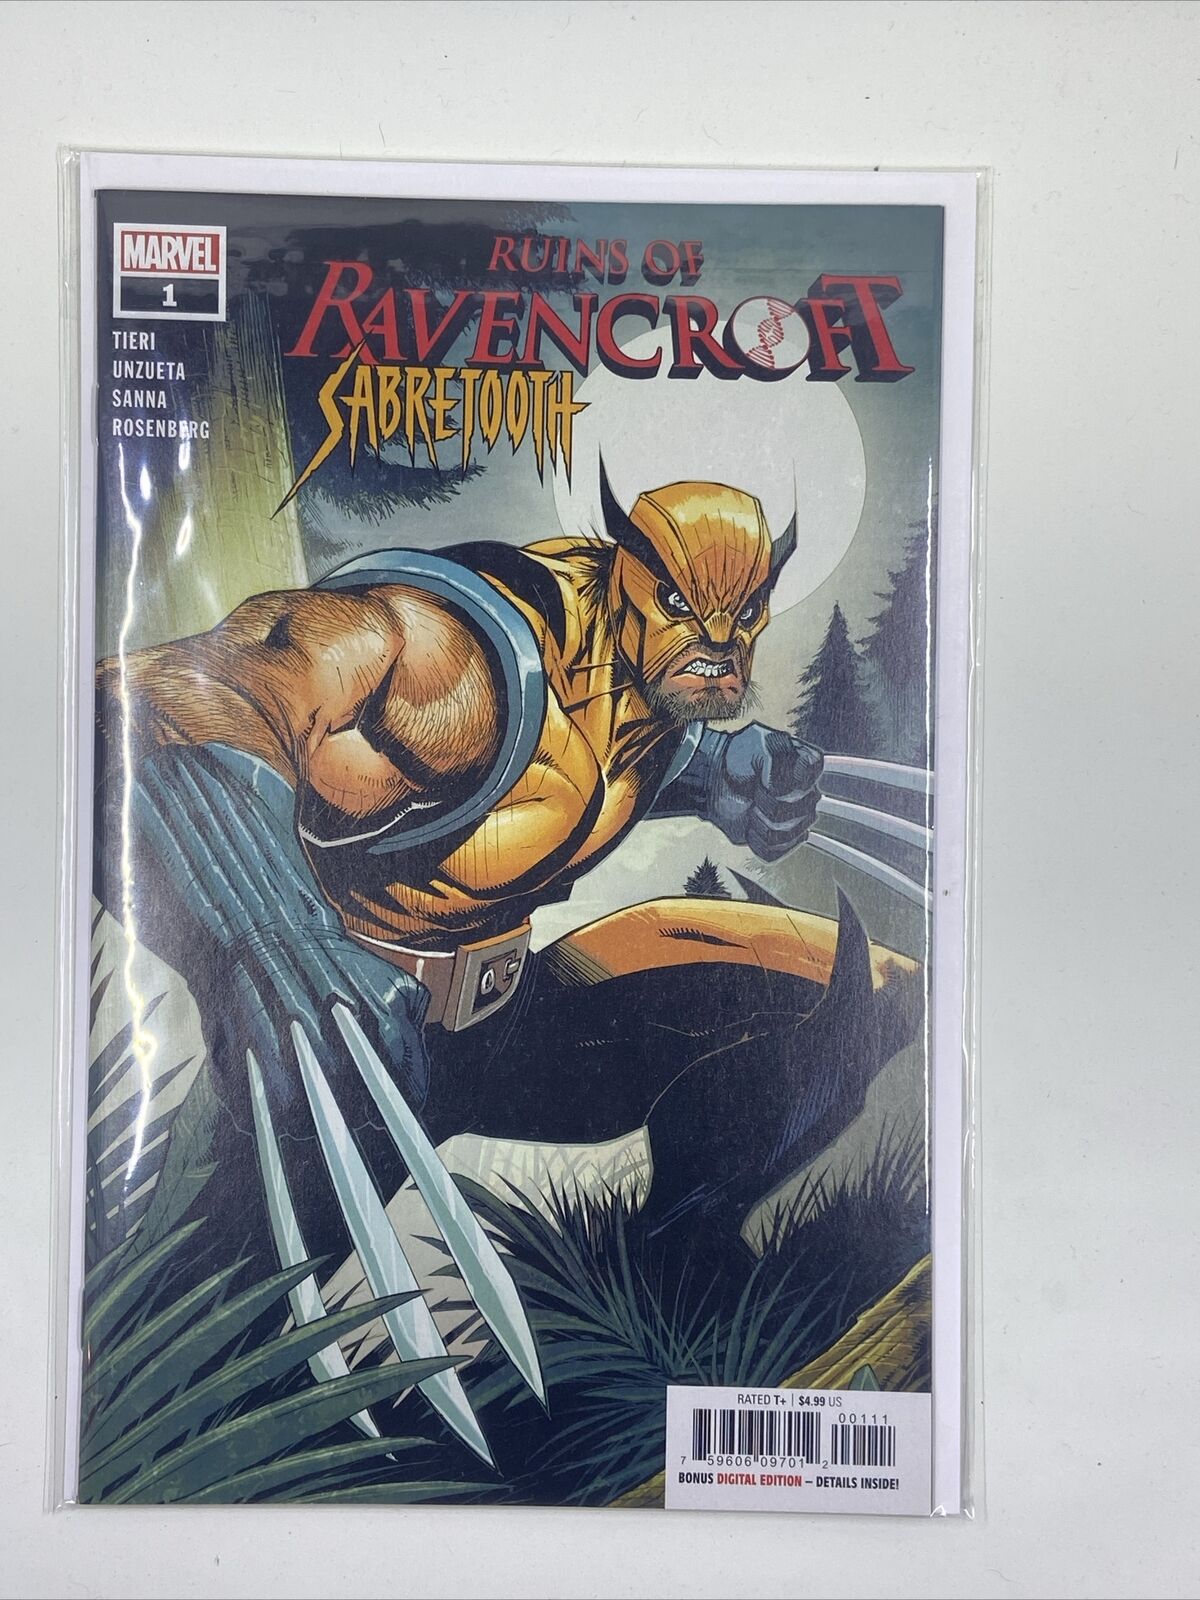 Ruins of Ravencroft: Sabretooth #1 in NM minus condition. Marvel comics [a~